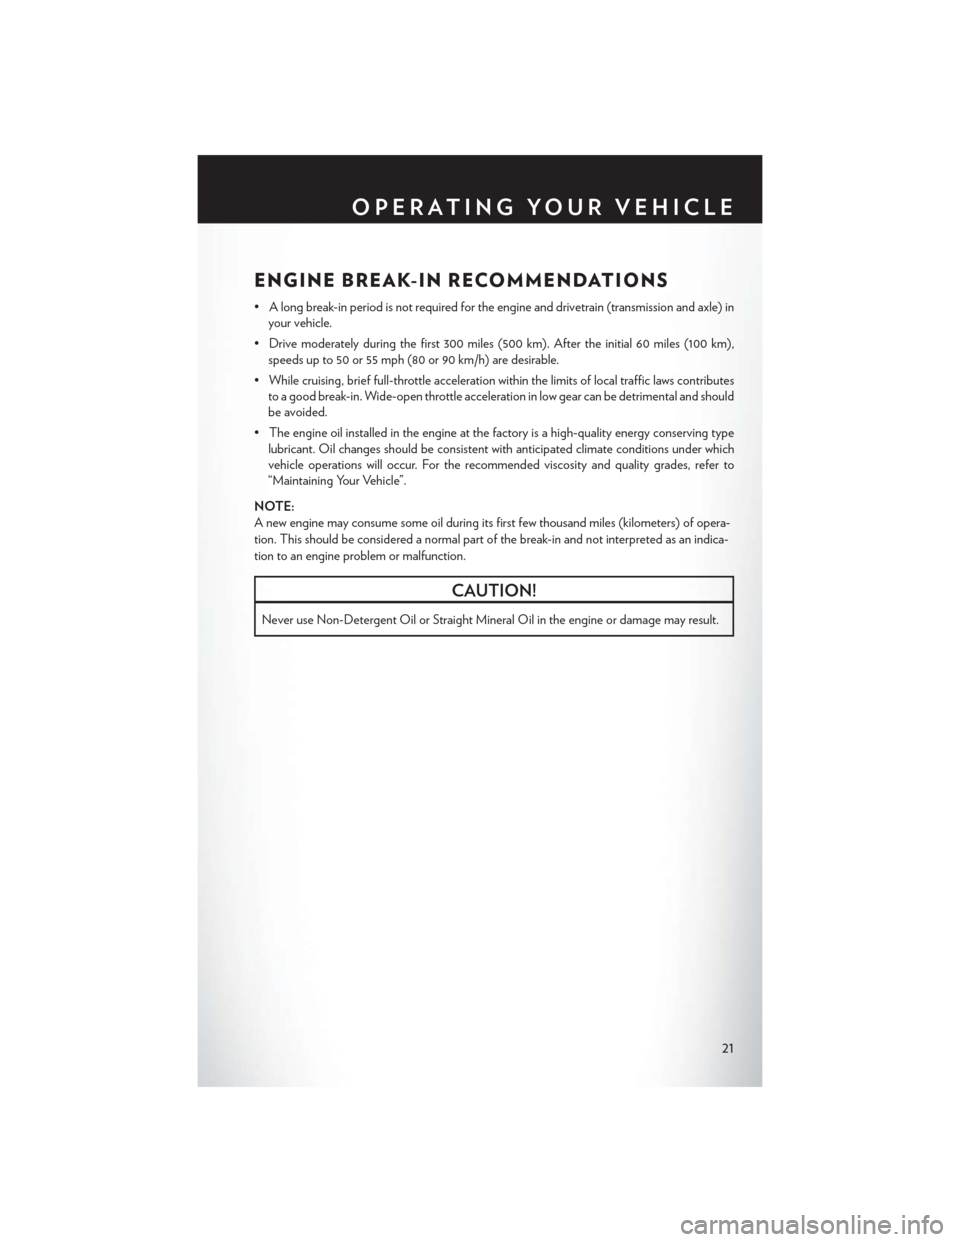 CHRYSLER 200 CONVERTIBLE 2014 1.G User Guide ENGINE BREAK-IN RECOMMENDATIONS
• A long break-in period is not required for the engine and drivetrain (transmission and axle) inyour vehicle.
• Drive moderately during the first 300 miles (500 km